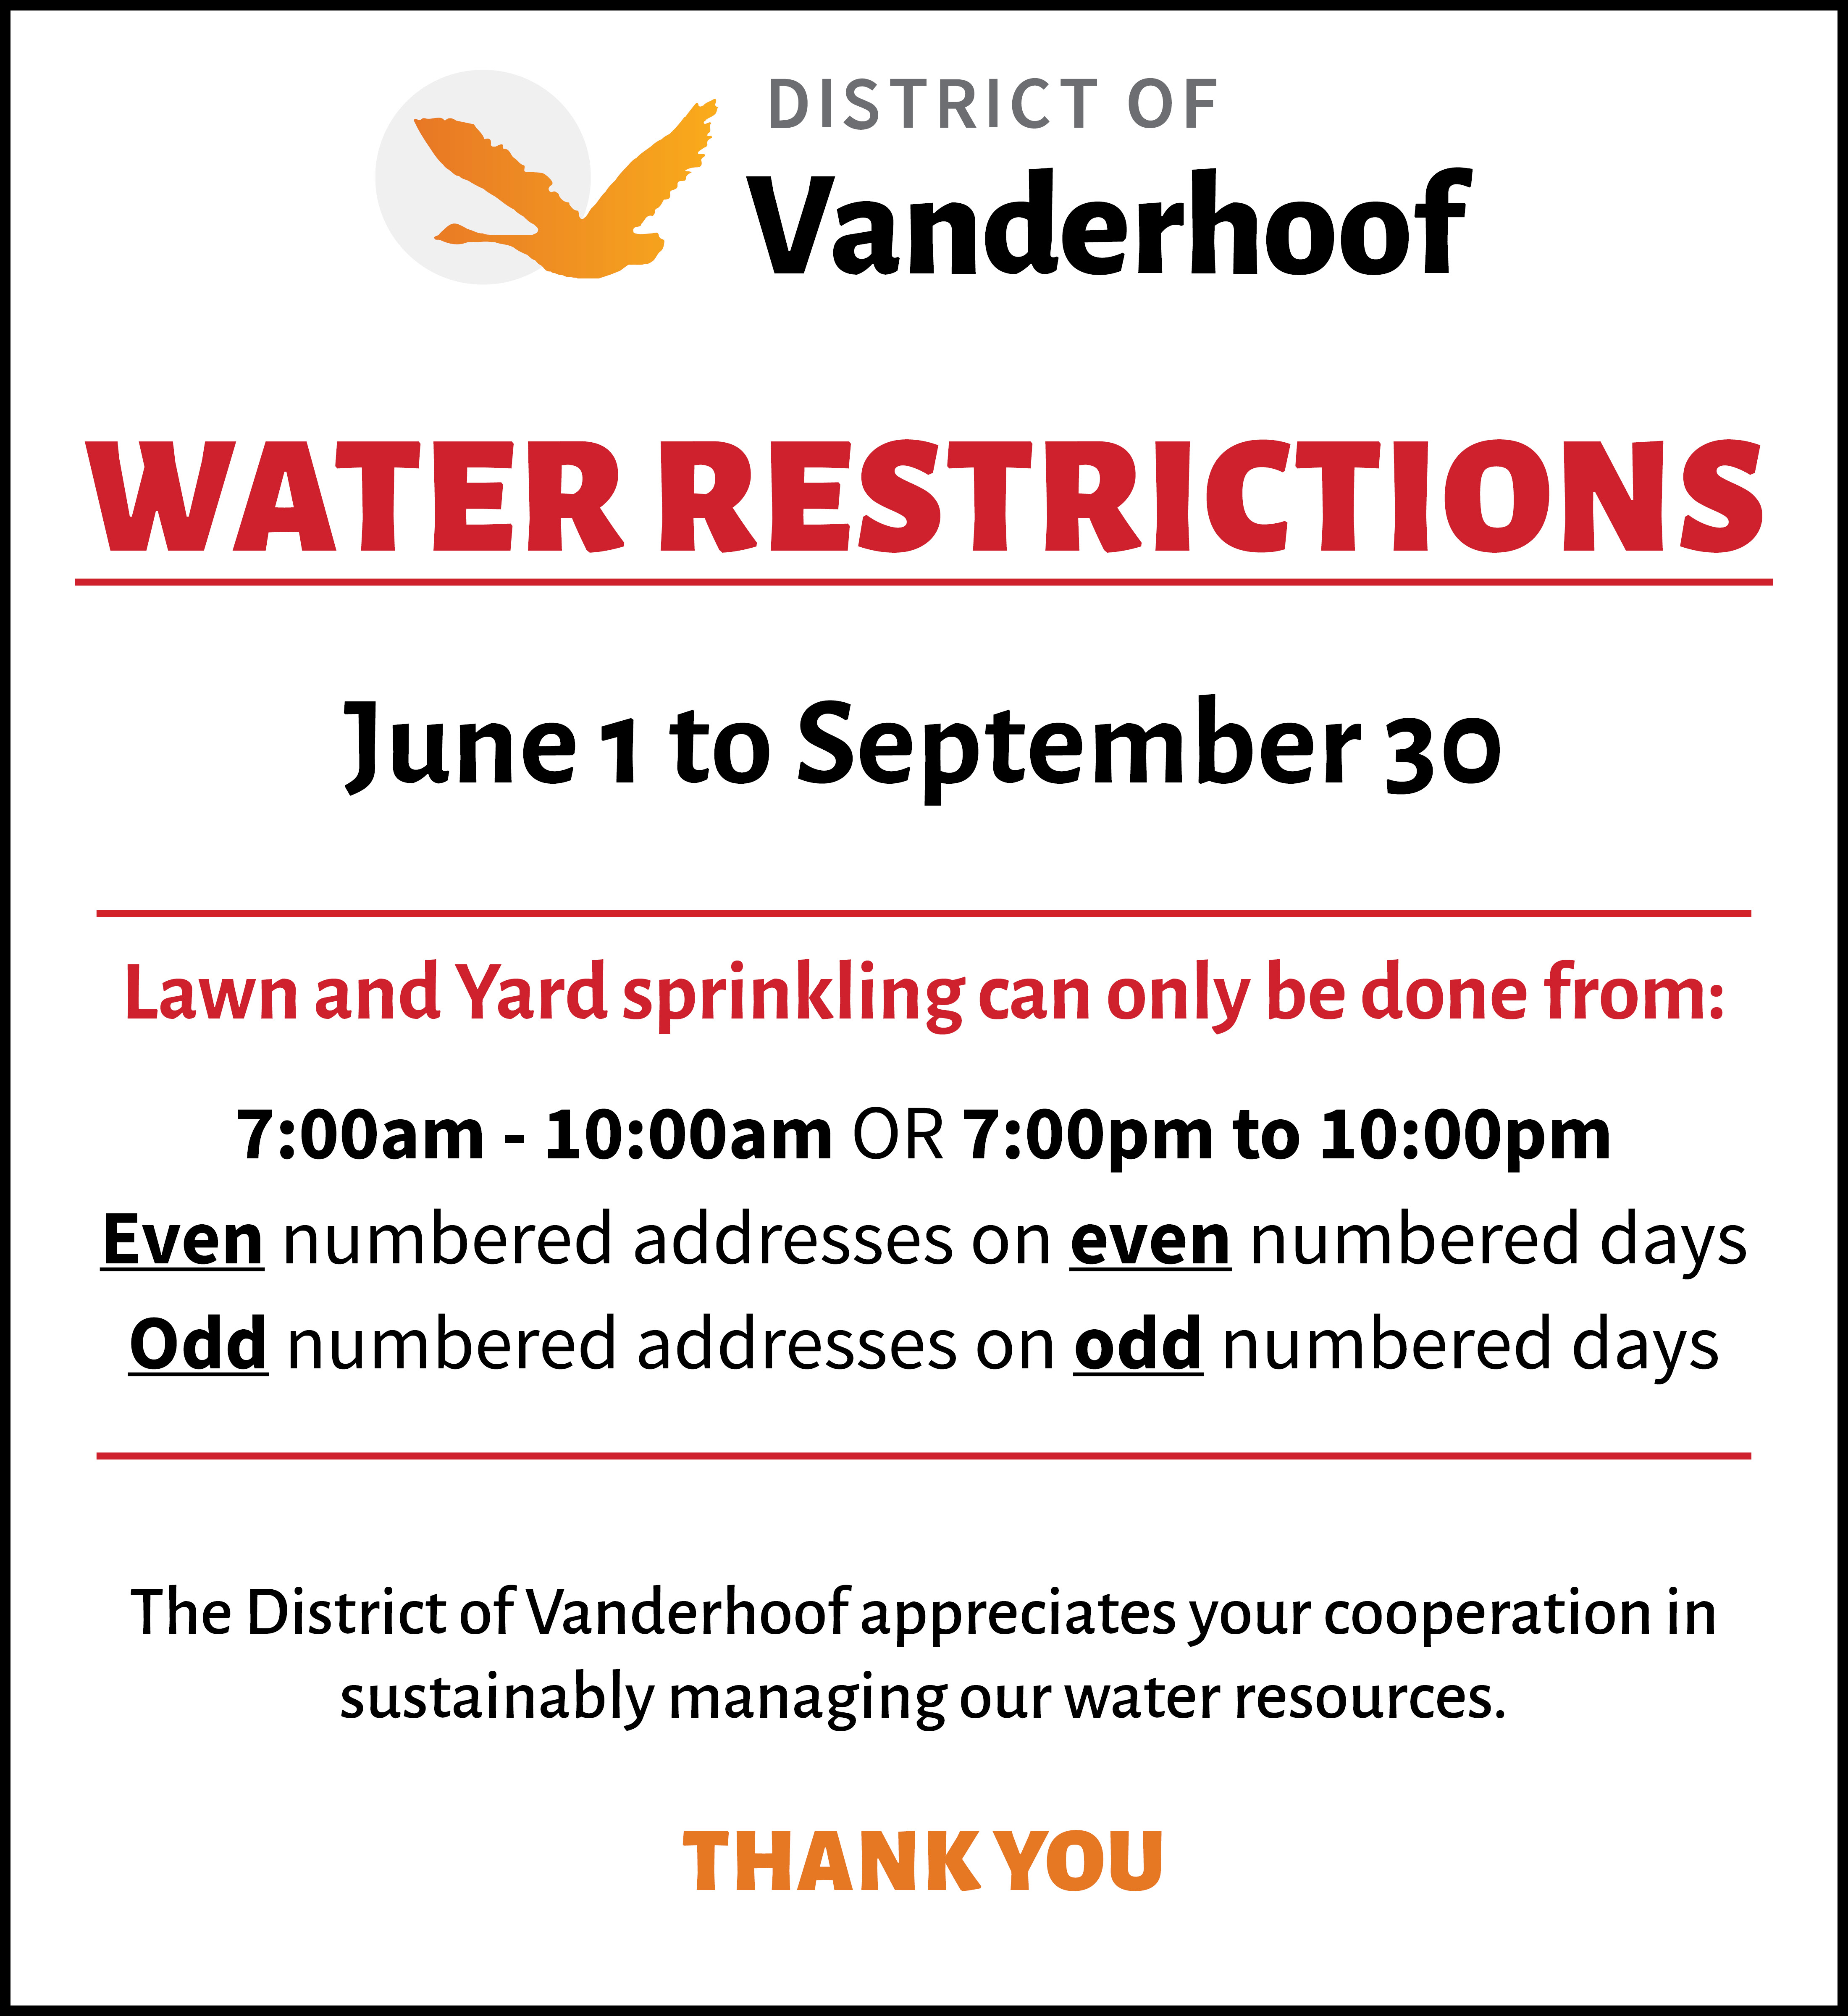 A reminder that sprinkling/water restrictions are now in effect from June 1 to September 30 for all residents on the municipal water system. Lawn and yard sprinkling can only be done from: 7:00am – 10:00am OR 7:00pm to 10:00pm. Even numbered address on even numbered days and Odd numbered address on odd numbered days. The District of Vanderhoof appreciates your cooperation. 